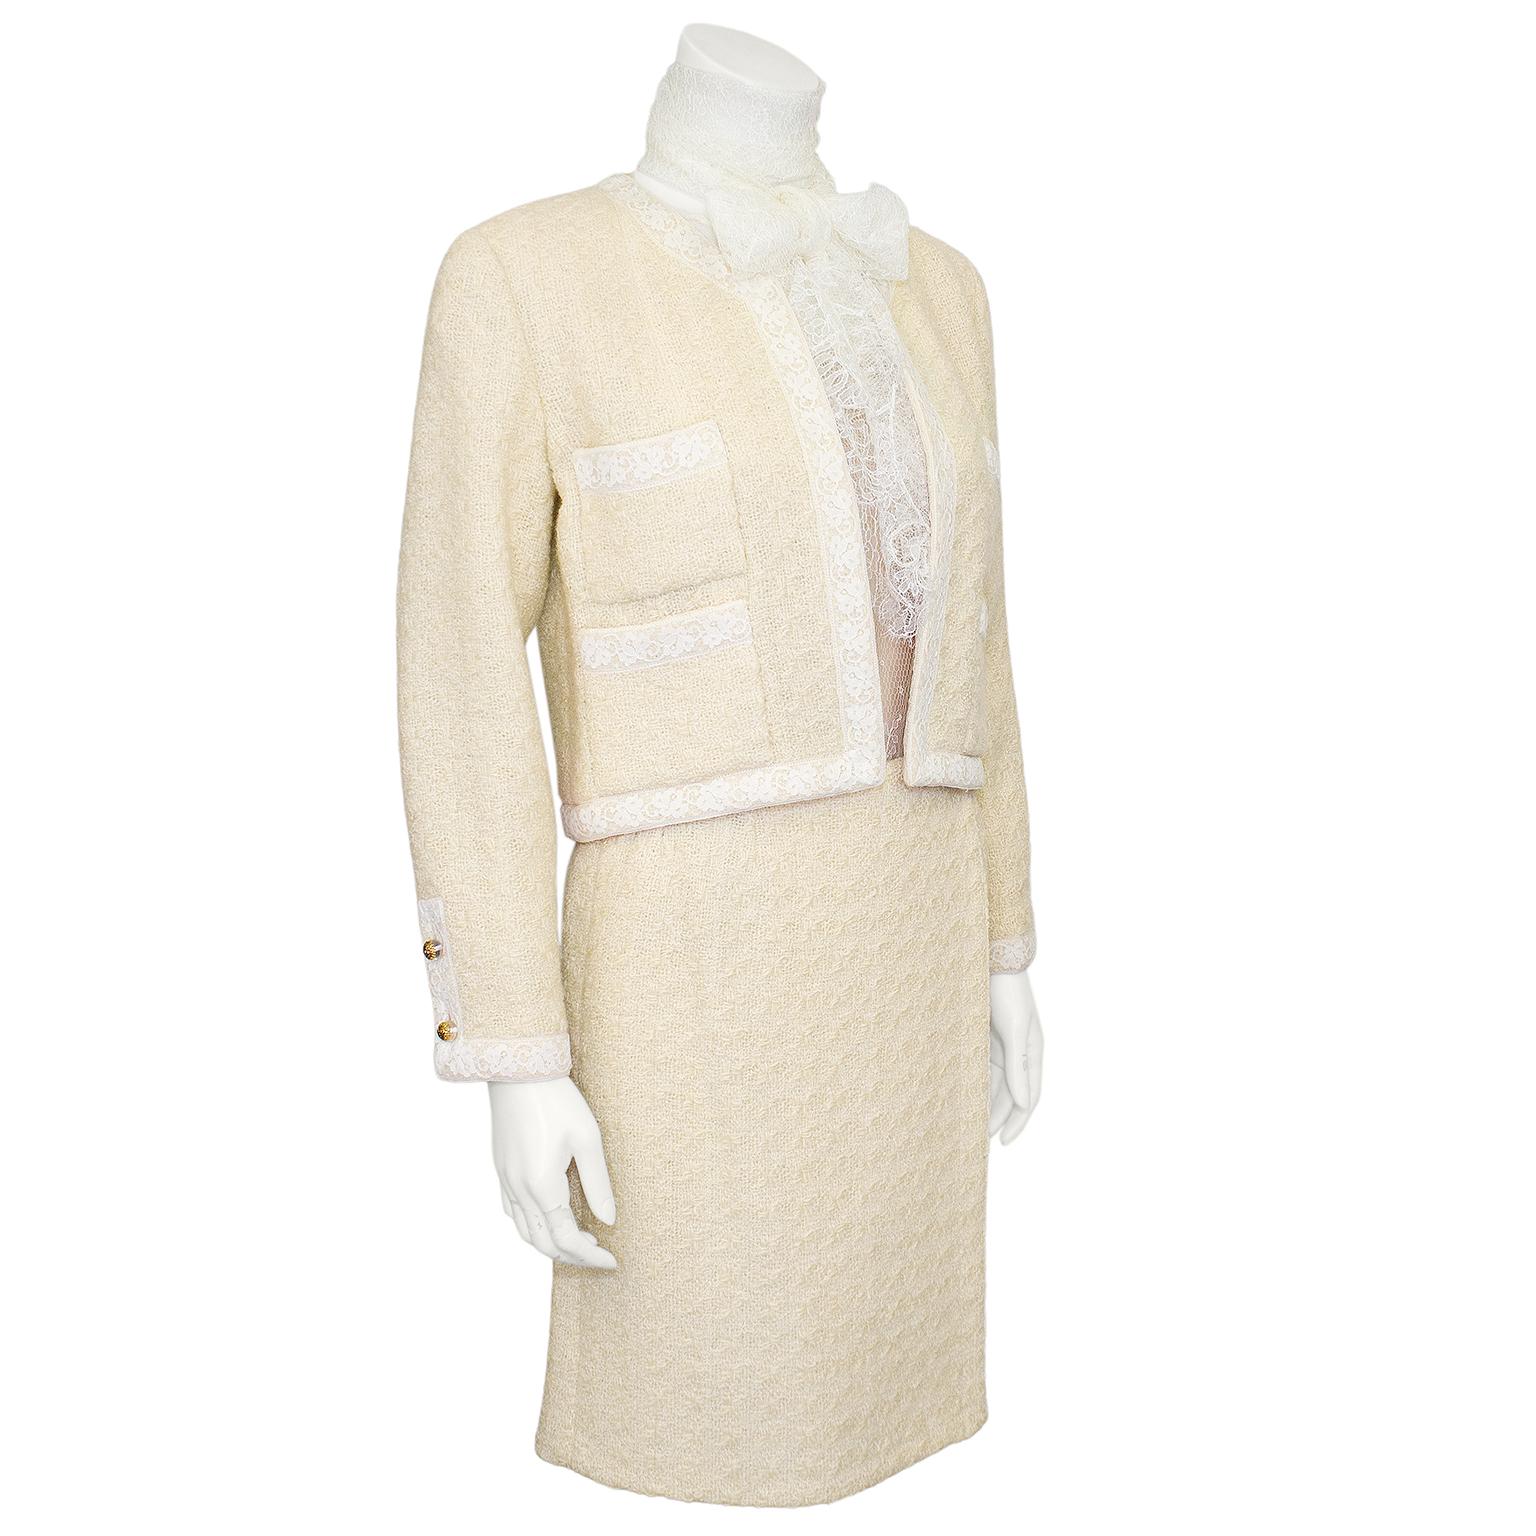 Stunning Chanel suit from the 1990s. Classic in shape and style with white lace complimenting the cream boucle beautifully. The cropped, boxy, collarless jacket with four patch pockets sits open with lace trim and small dome shaped lucite and gilt